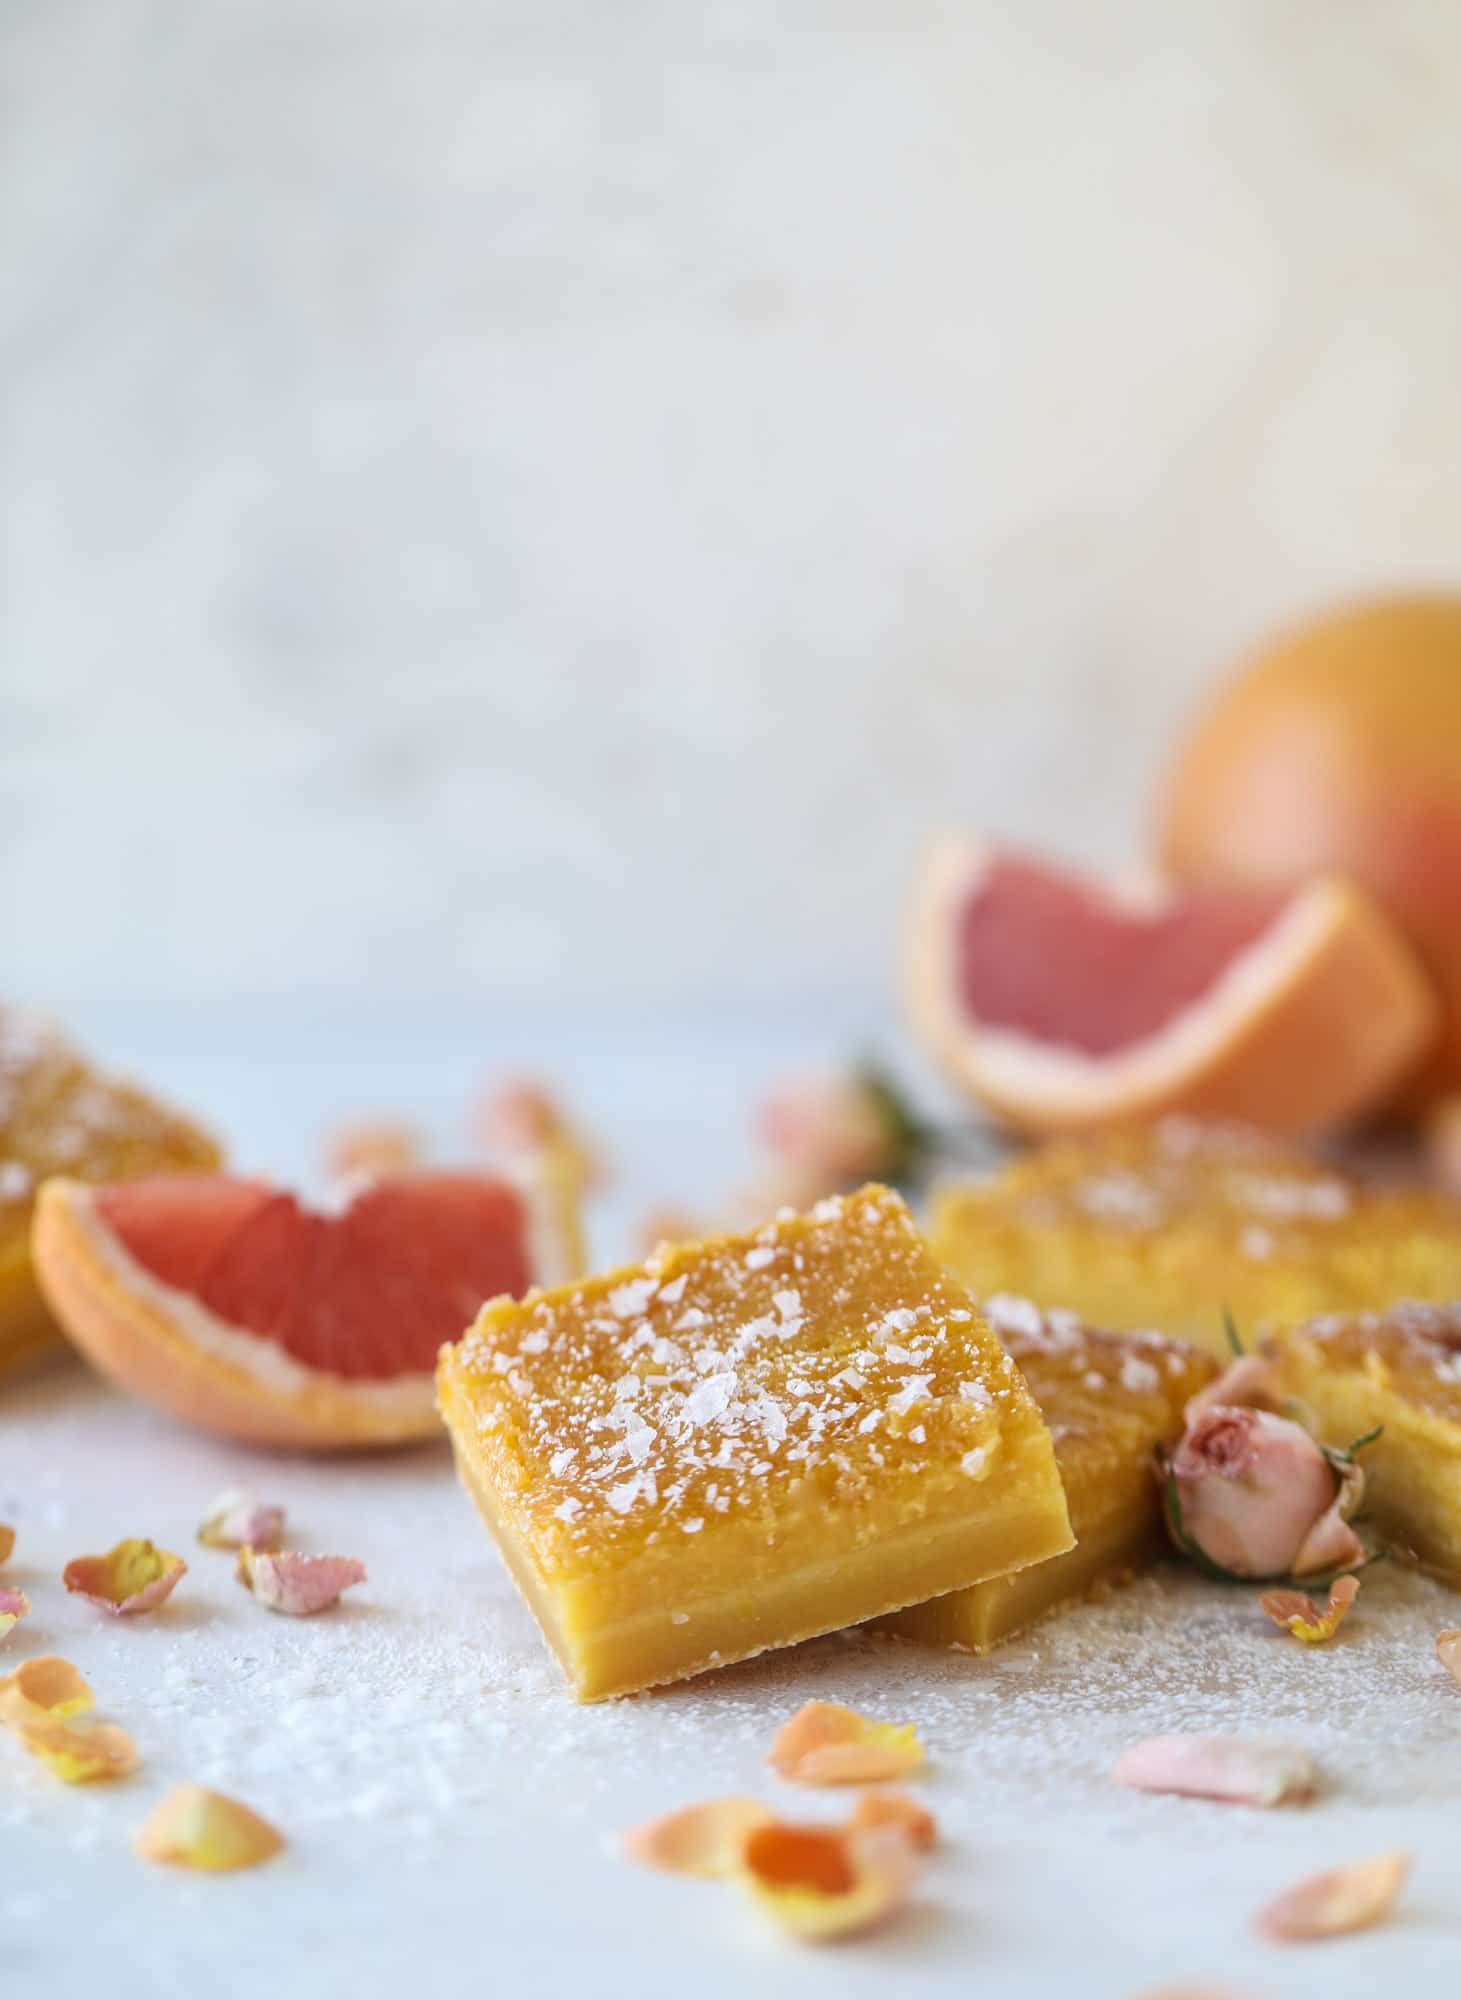 These salted citrus bars are made of both grapefruit and lemon curd on a buttery shortbread crust. Top with flaked sea salt for the perfect bite!